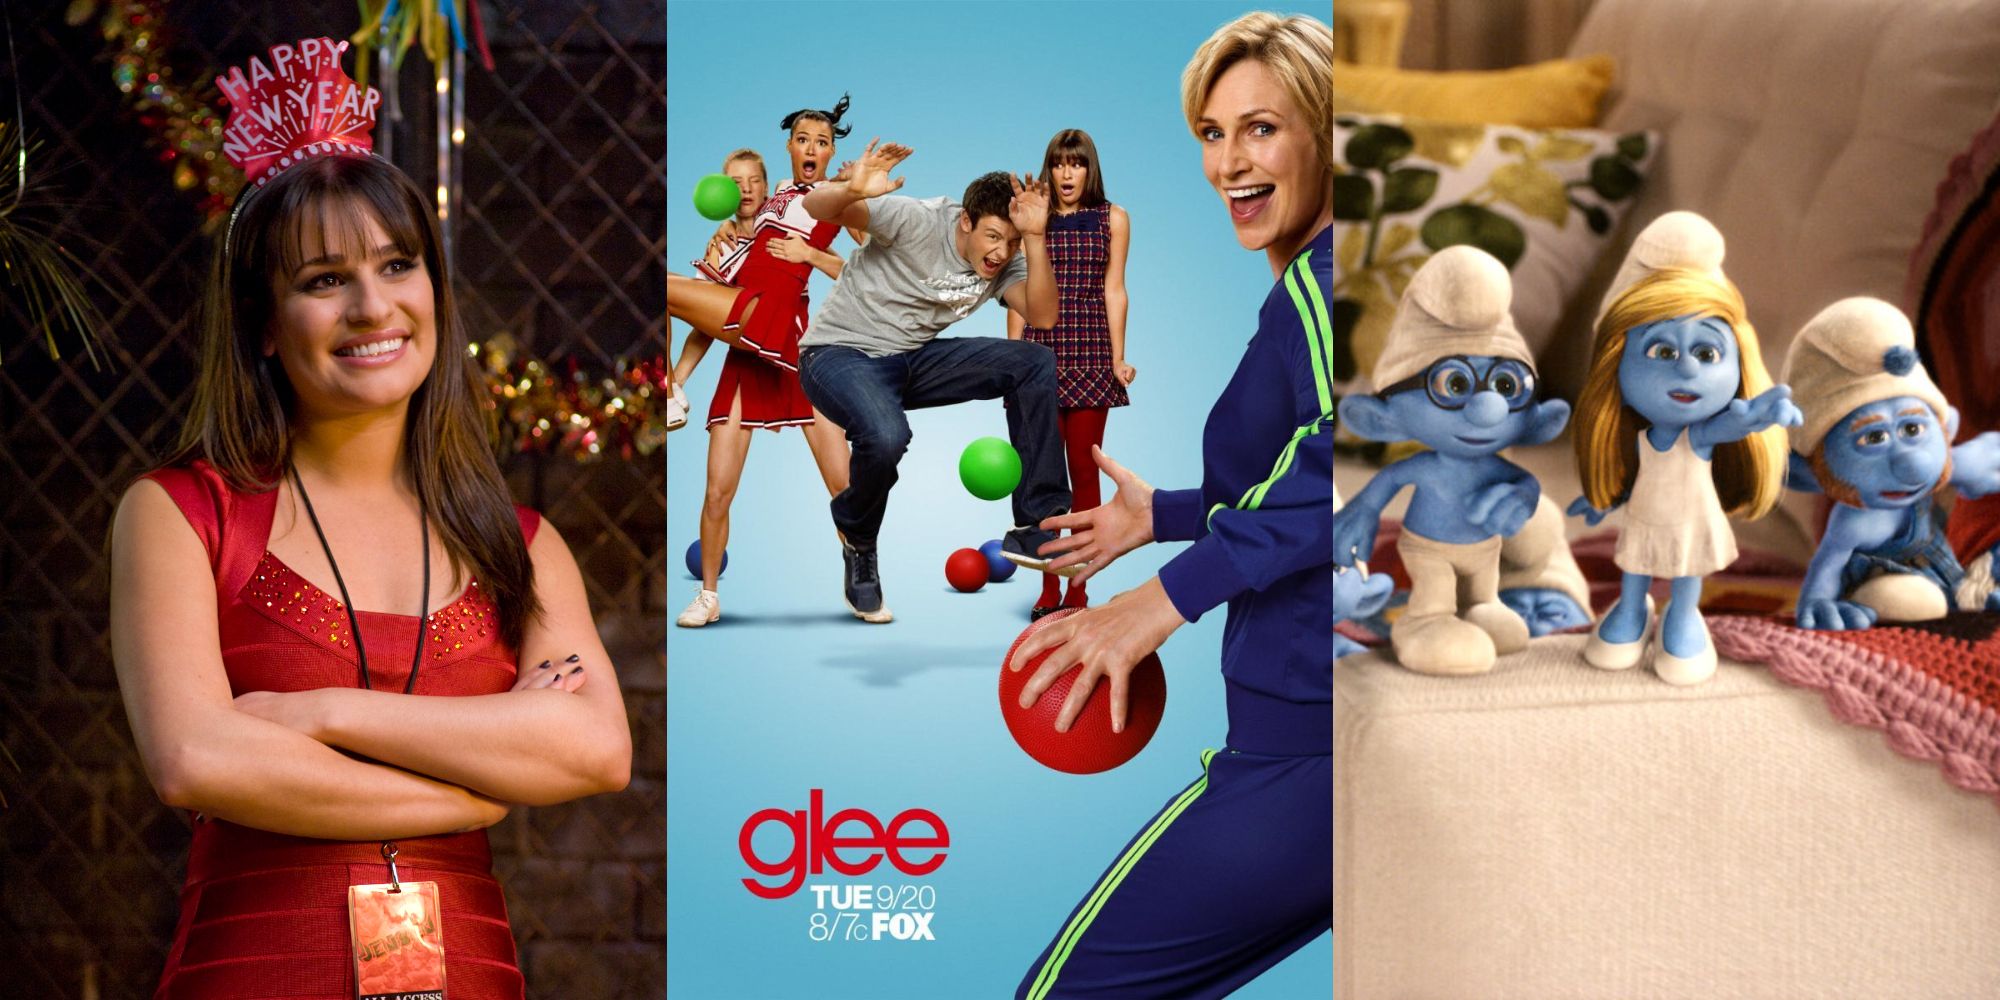 10 Movies Where Glee Actors Were Together Again